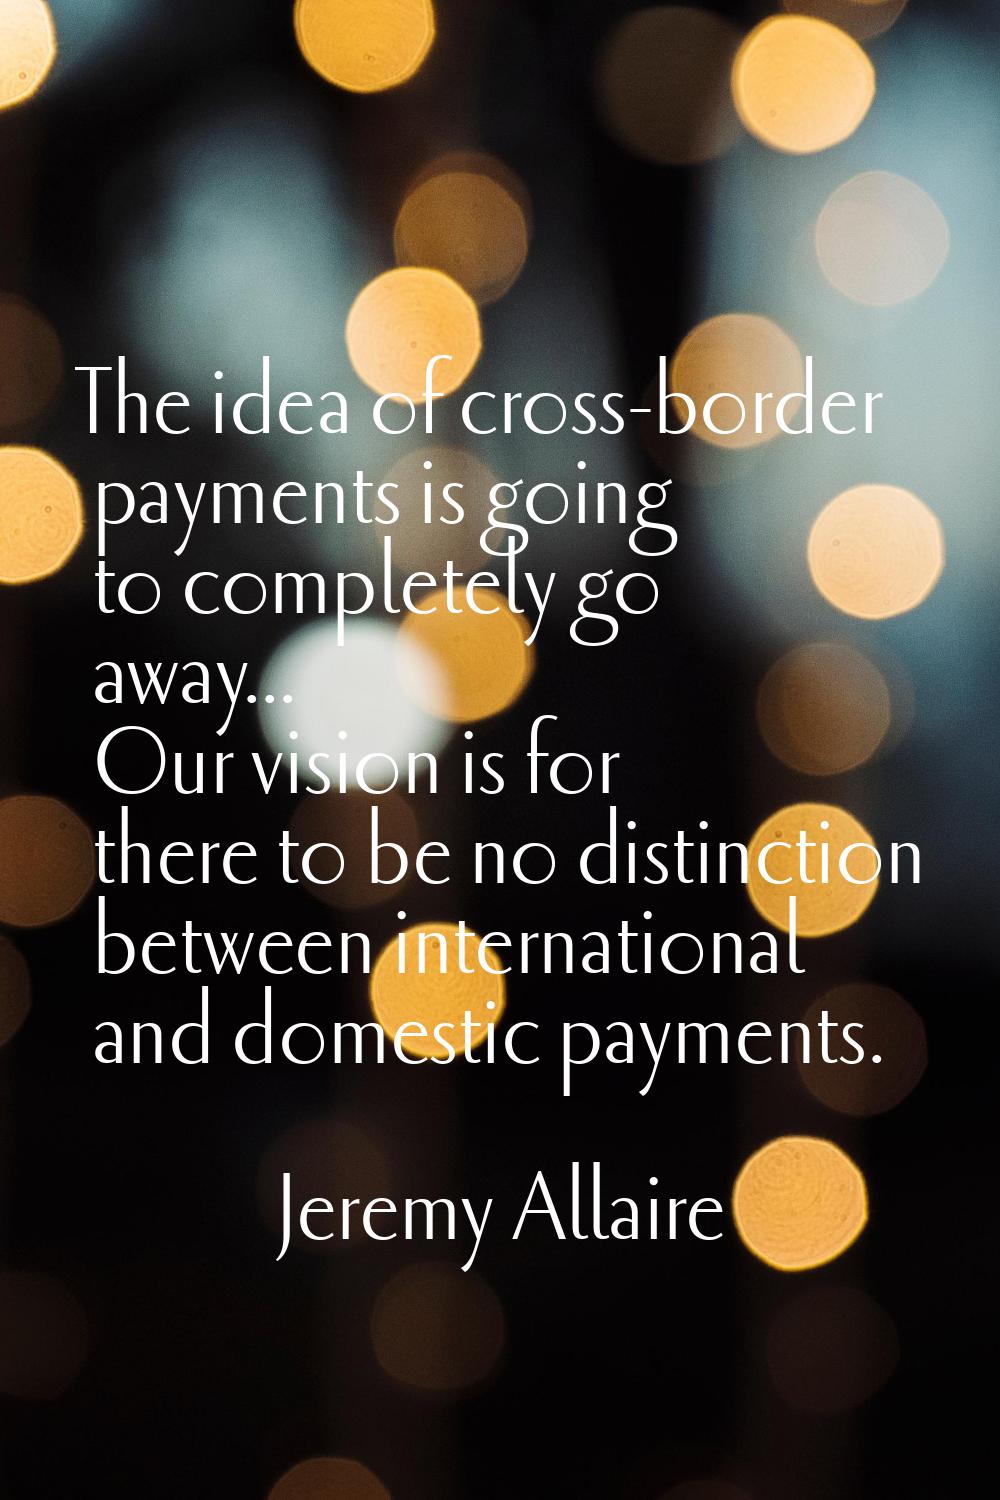 The idea of cross-border payments is going to completely go away... Our vision is for there to be n